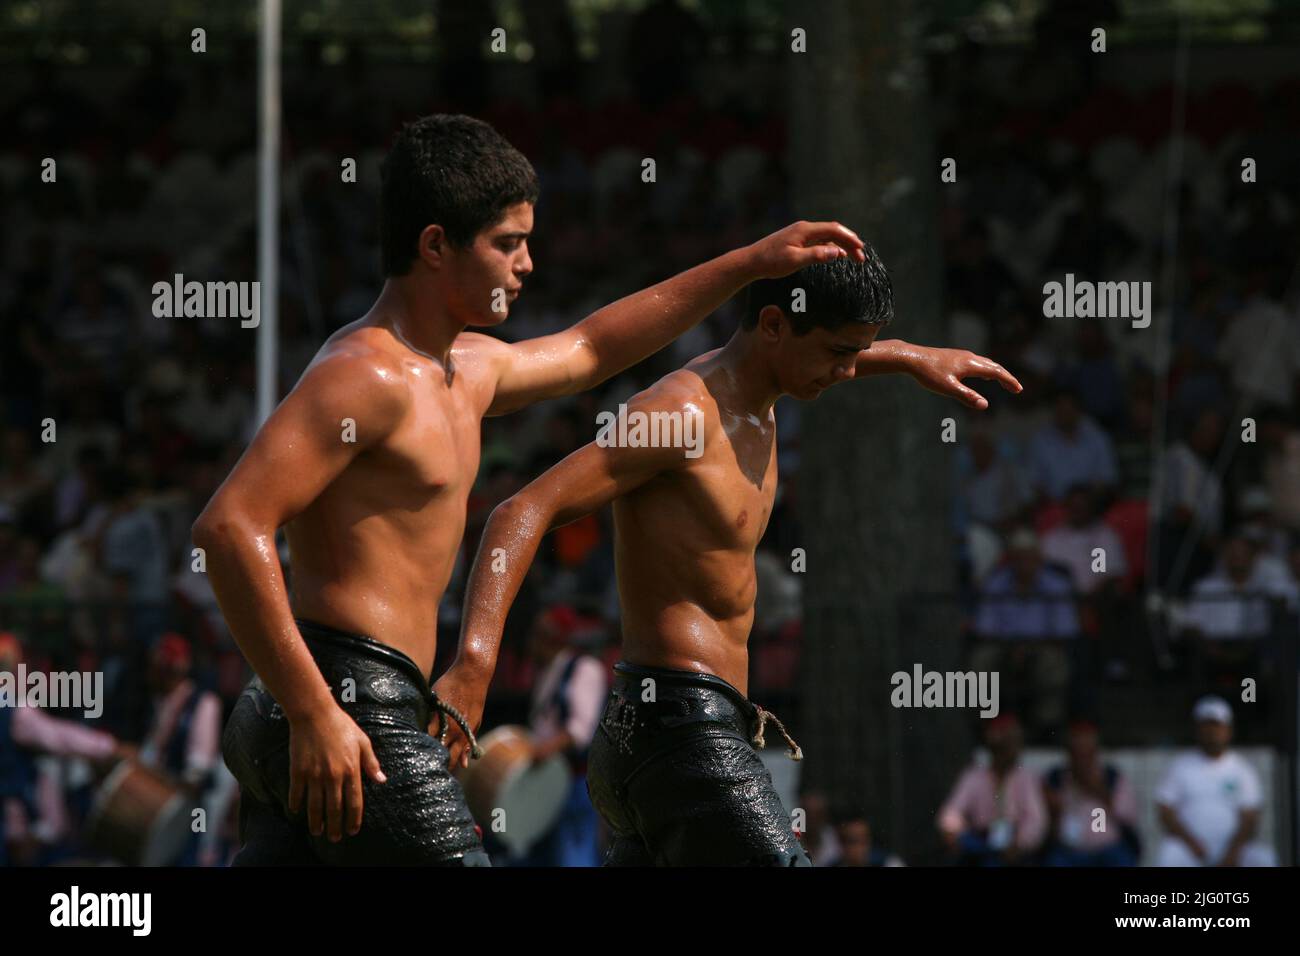 Kırkpınar (Turkish Oil Wrestling). Young wrestlers march through the stadium before their fights during the 648th Kırkpınar Tournament in Edirne, Turkey, on 5 July 2009. Kırkpınar wrestlers compete stripped to the waist and smeared their bodies with olive oil. Stock Photo